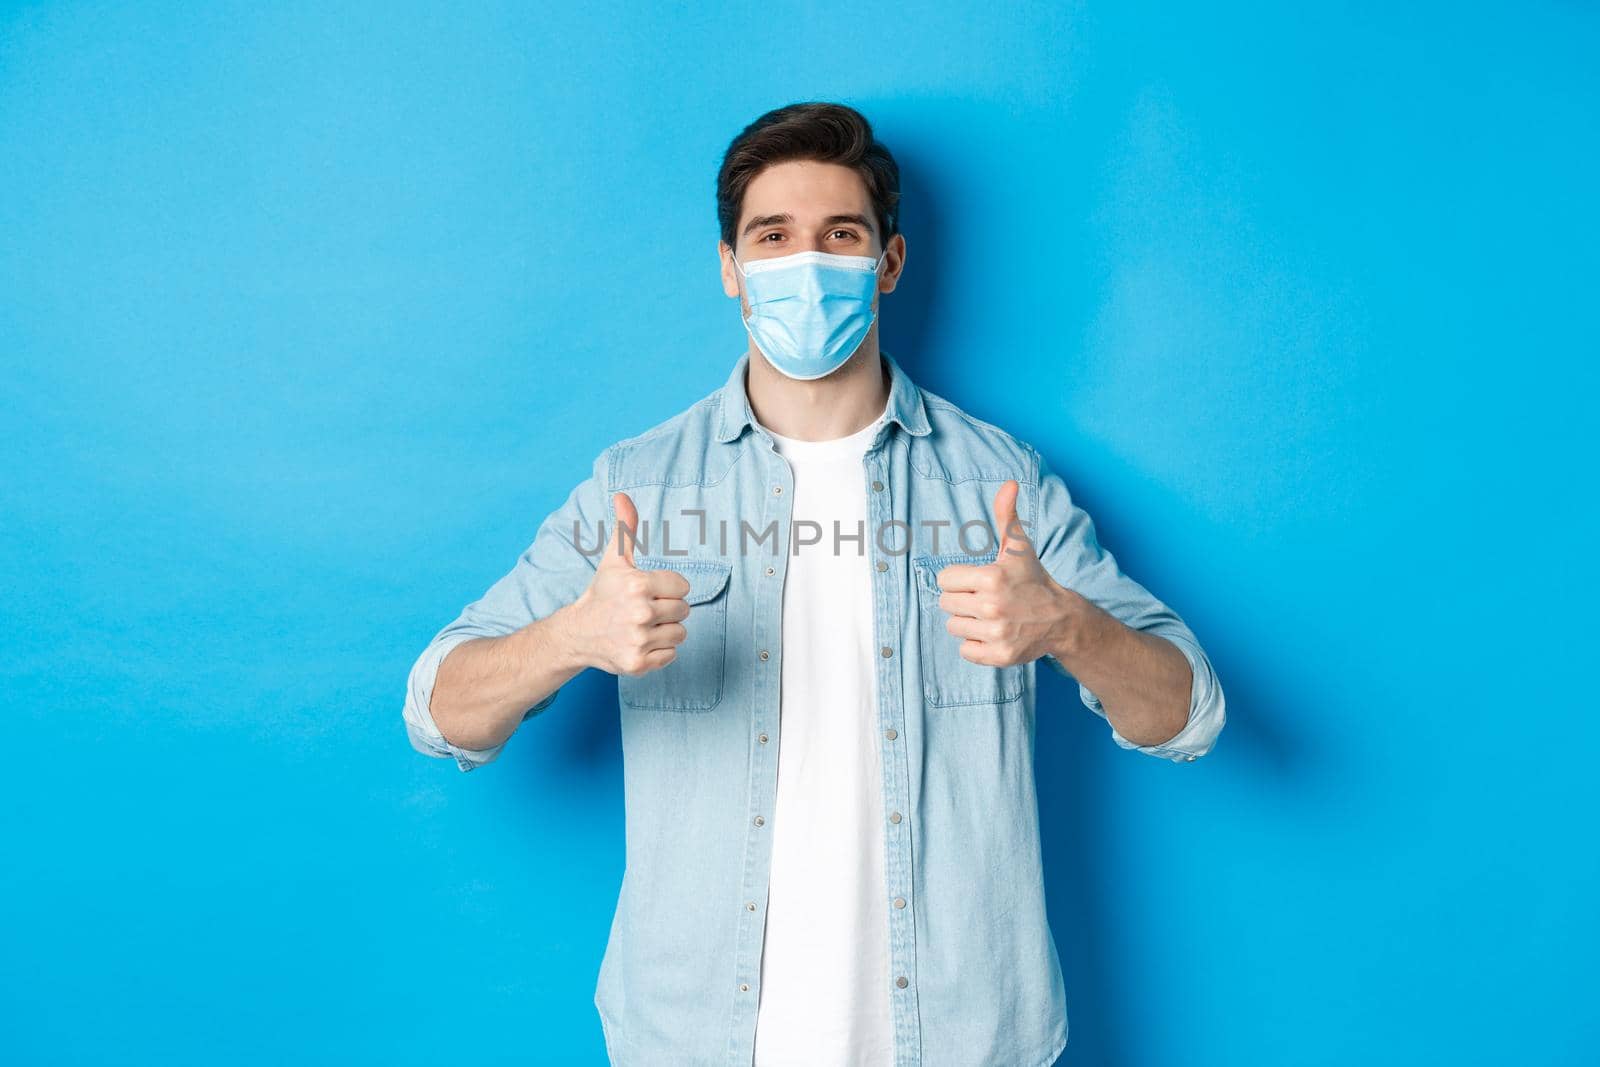 Concept of covid-19, pandemic and social distancing. Young man in medical mask showing thumbs-up in approval, like and agree, standing against blue background.